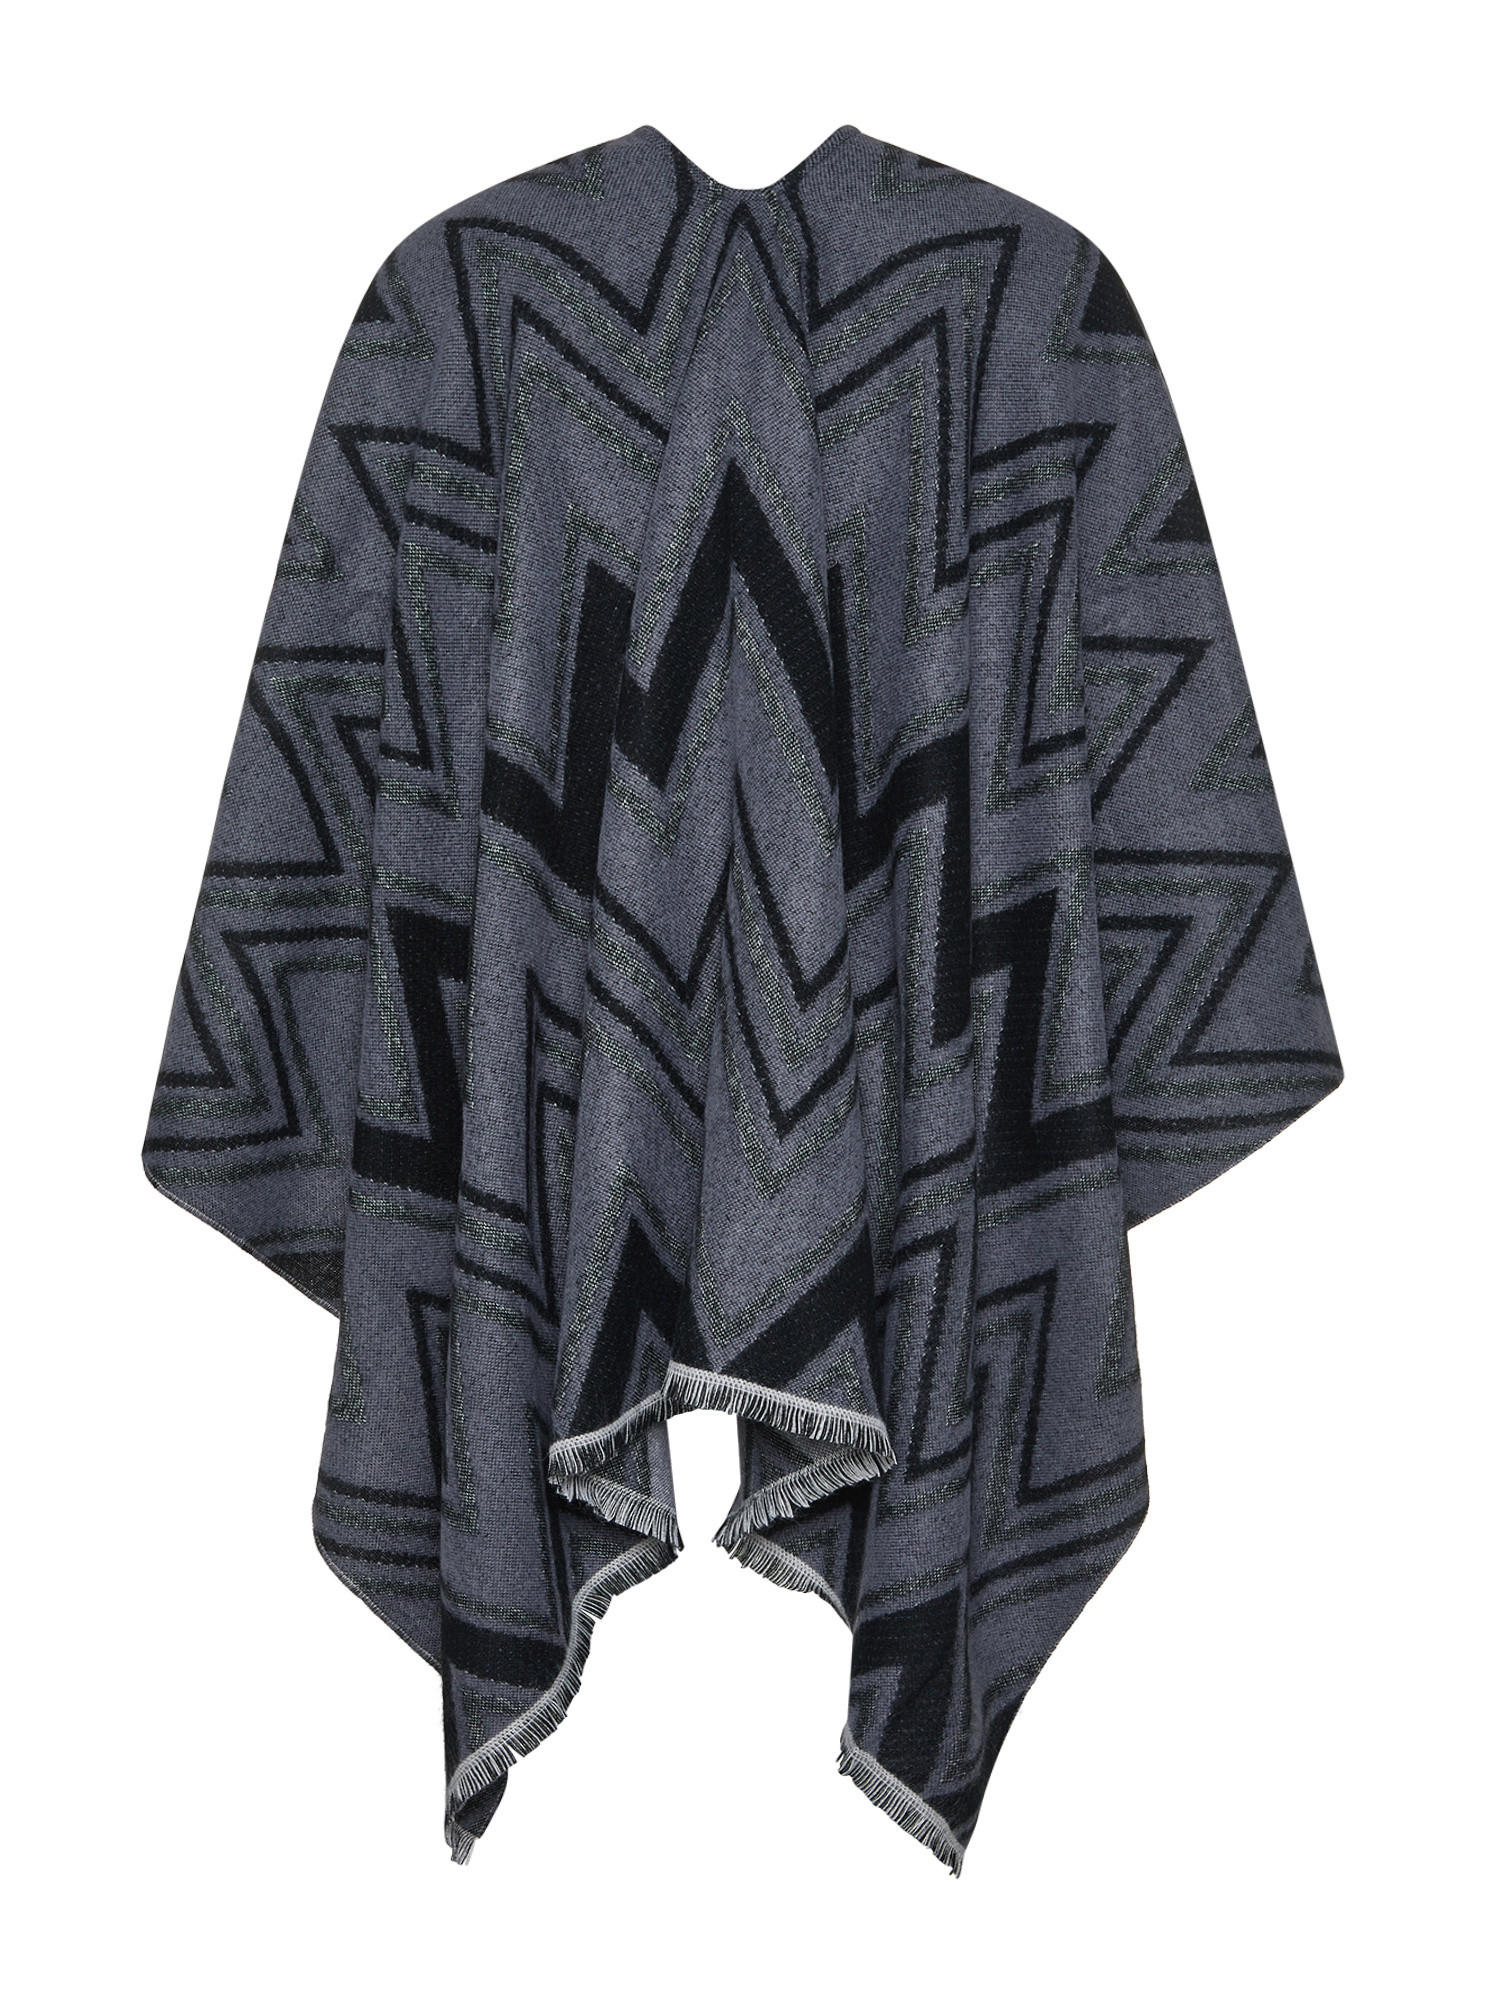 Koan - Cape with zig-zag pattern, Grey, large image number 1